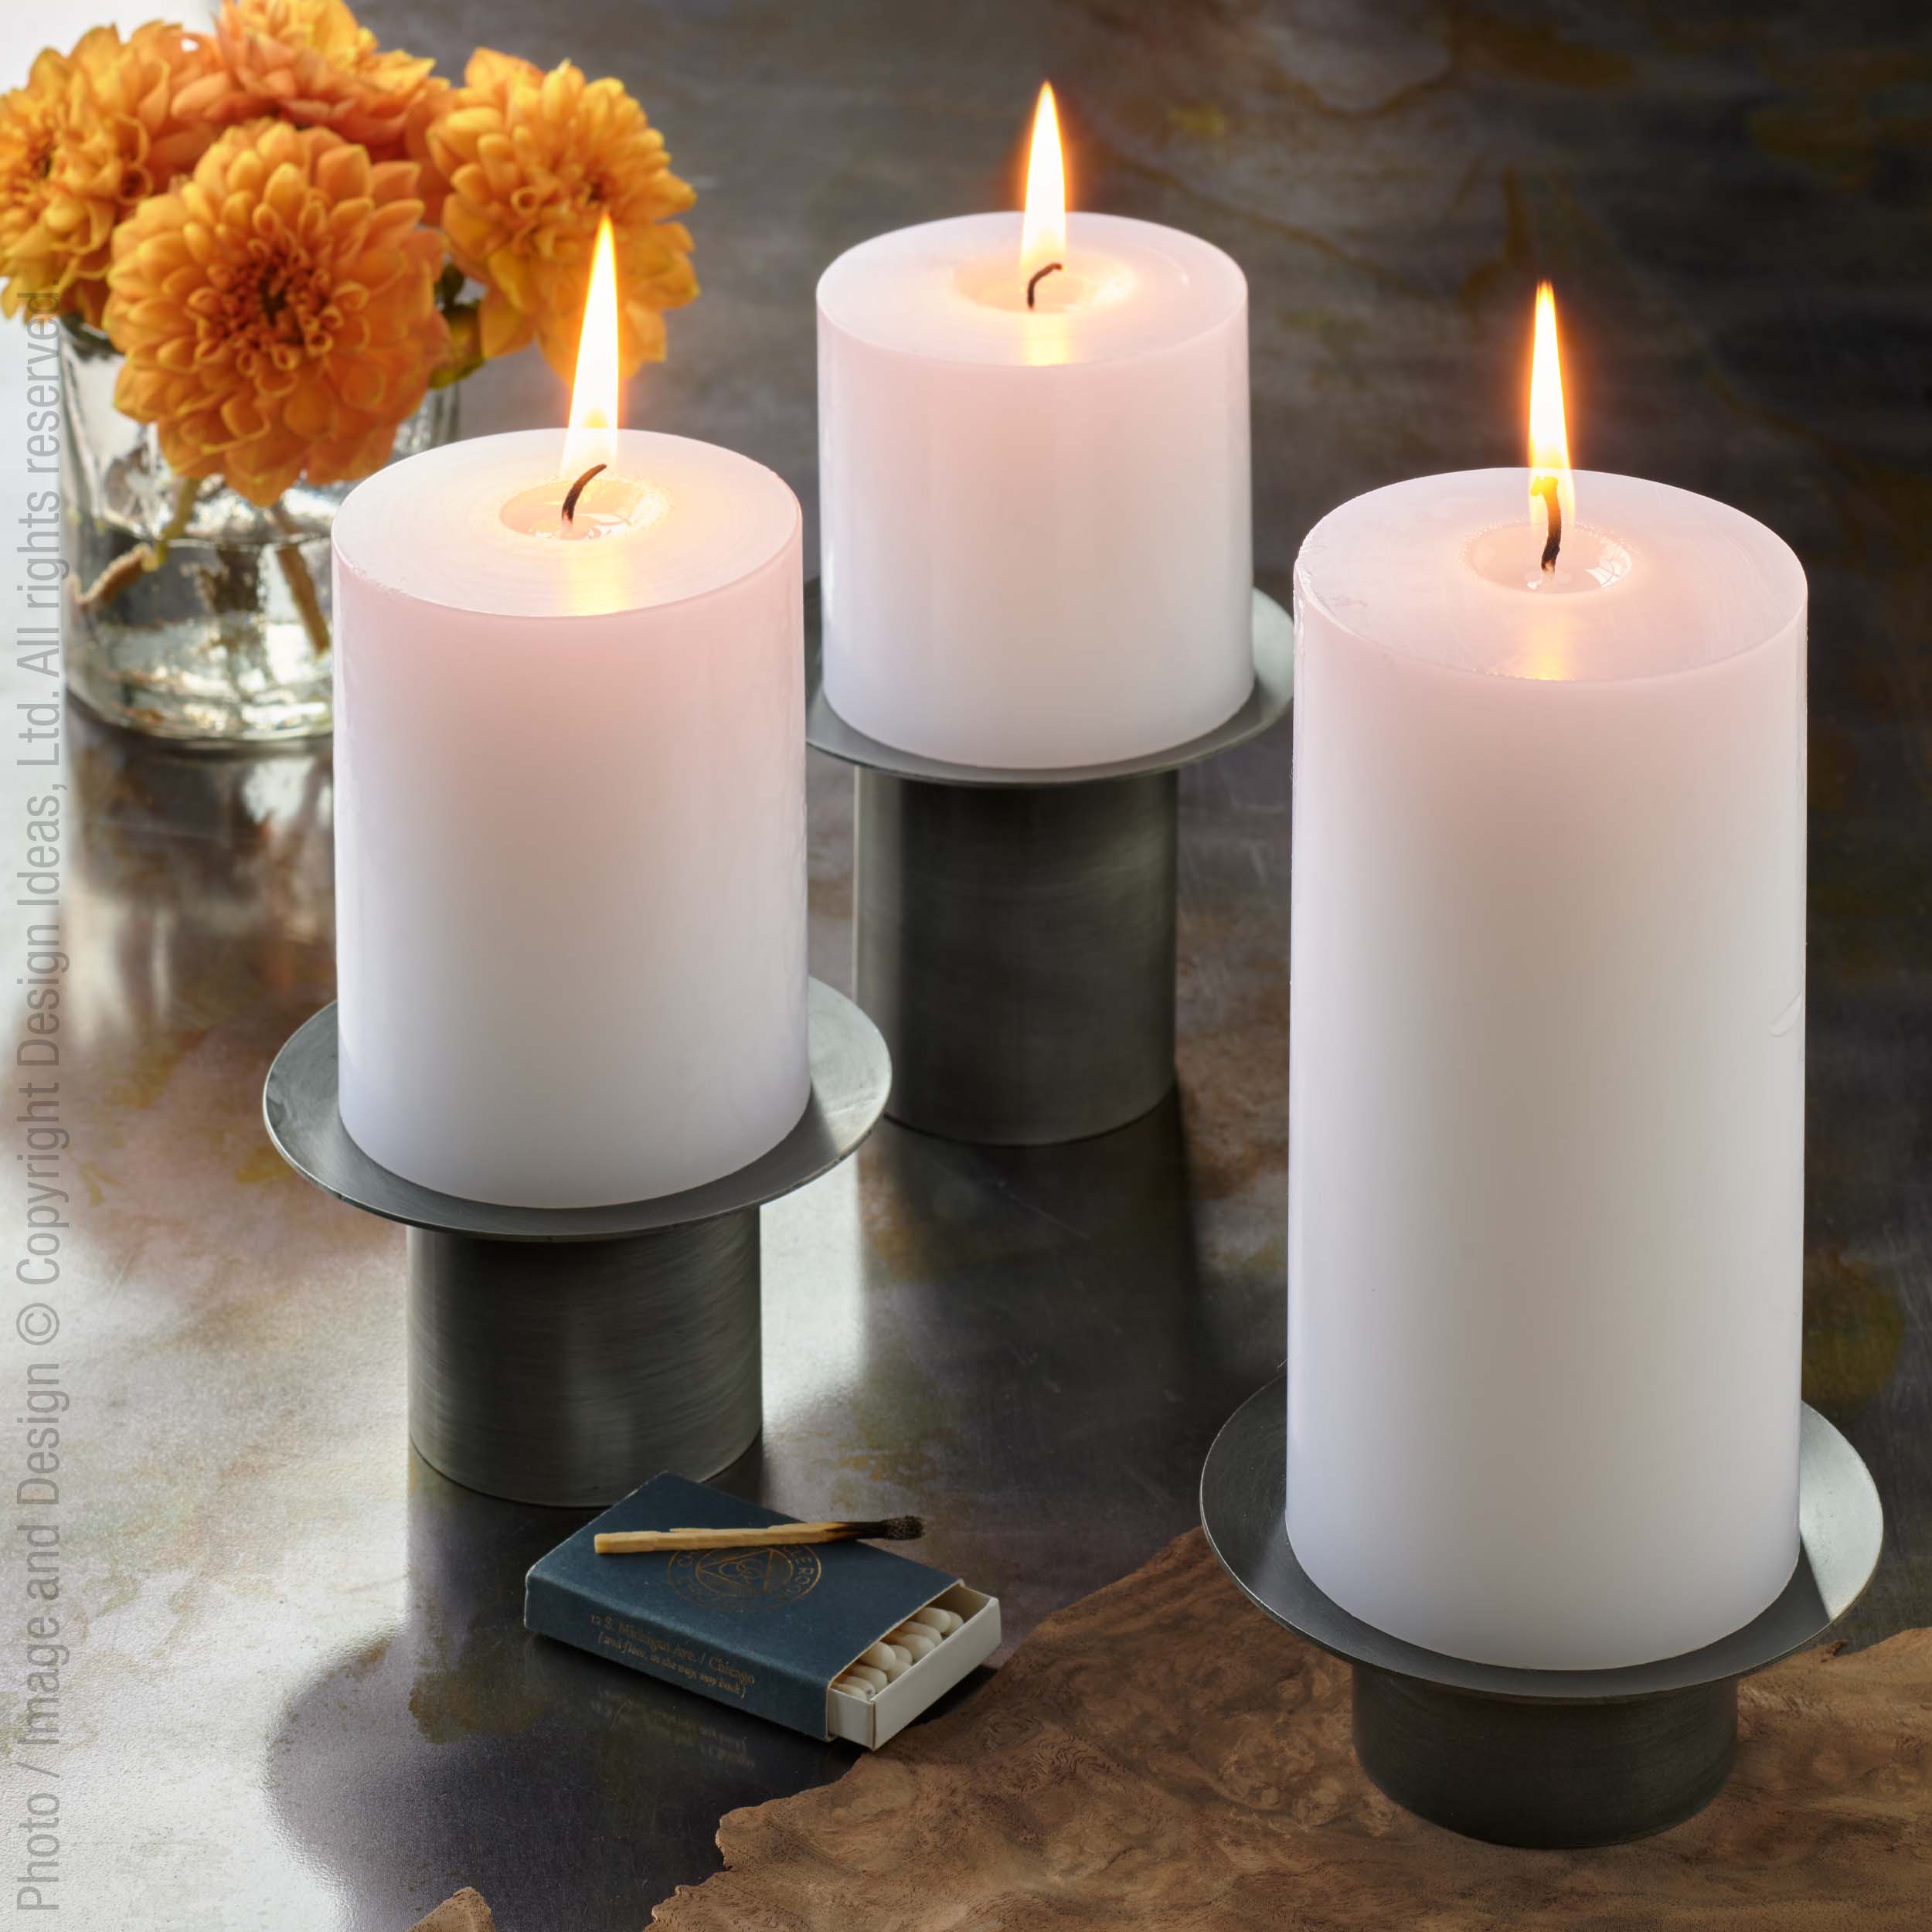 Rennik™ taper holder (3in) - Black | Image 1 | Premium Candleholder from the Rennik collection | made with Steel for long lasting use | texxture